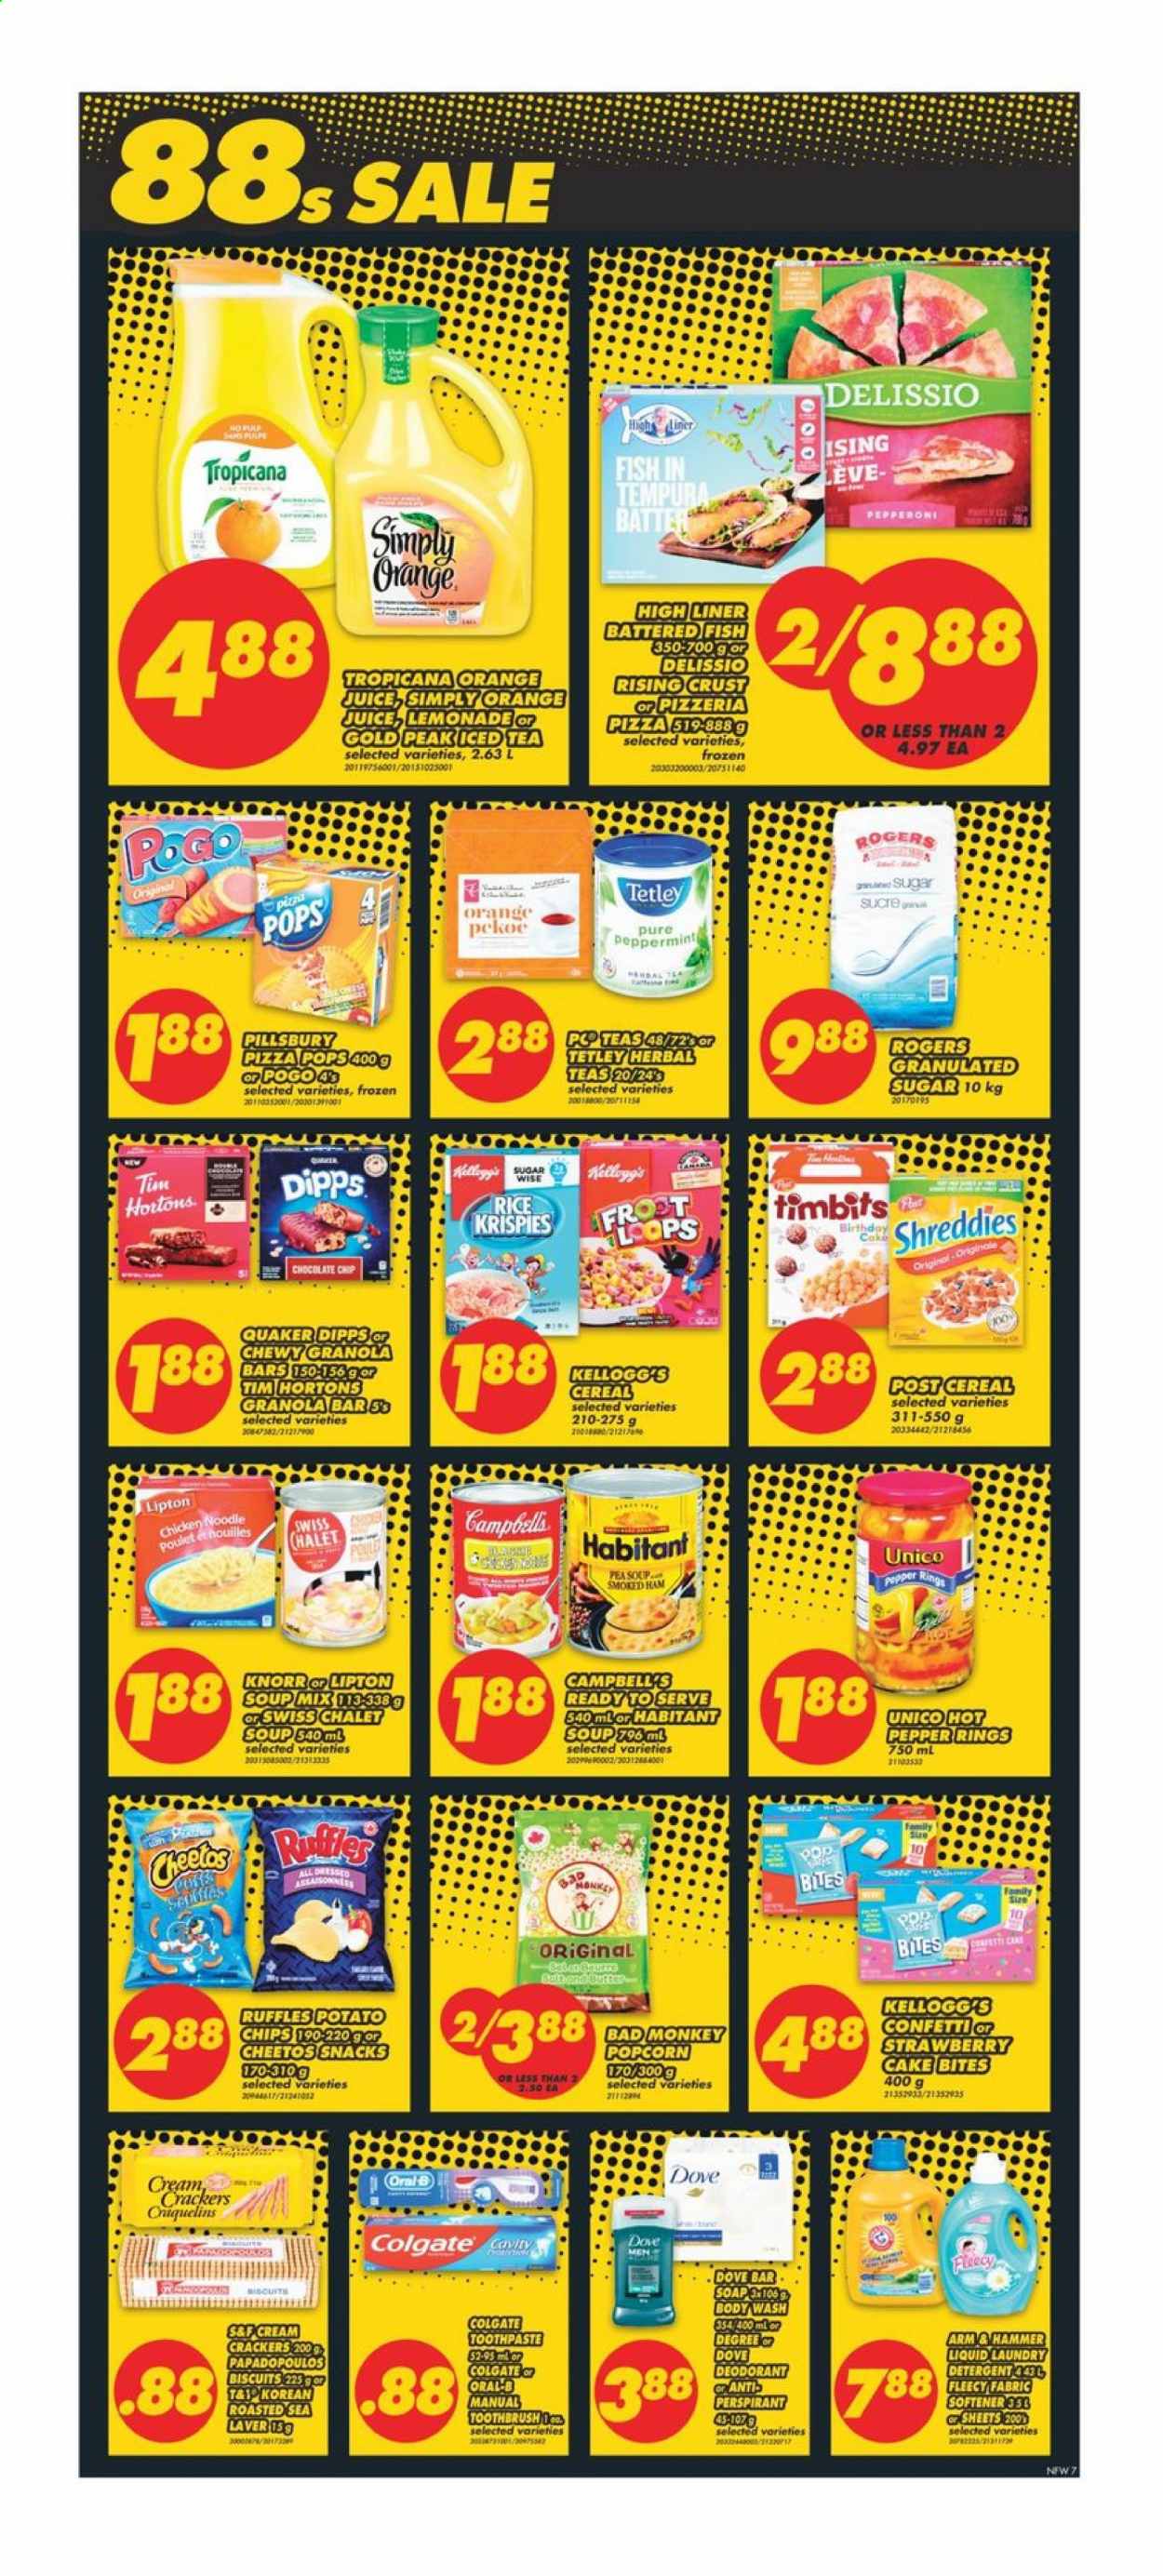 thumbnail - No Frills Flyer - January 15, 2021 - January 21, 2021 - Sales products - cake, fish, Campbell's, pizza, soup mix, soup, Pillsbury, Quaker, noodles, ham, smoked ham, pepperoni, chocolate, snack, crackers, Kellogg's, biscuit, potato chips, Cheetos, popcorn, Ruffles, granulated sugar, sugar, cereals, granola bar, Rice Krispies, lemonade, orange juice, juice, ice tea, fabric softener, body wash, soap bar, soap, toothbrush, toothpaste, anti-perspirant, hammer, monkey, Knorr, Oral-B, deodorant. Page 7.